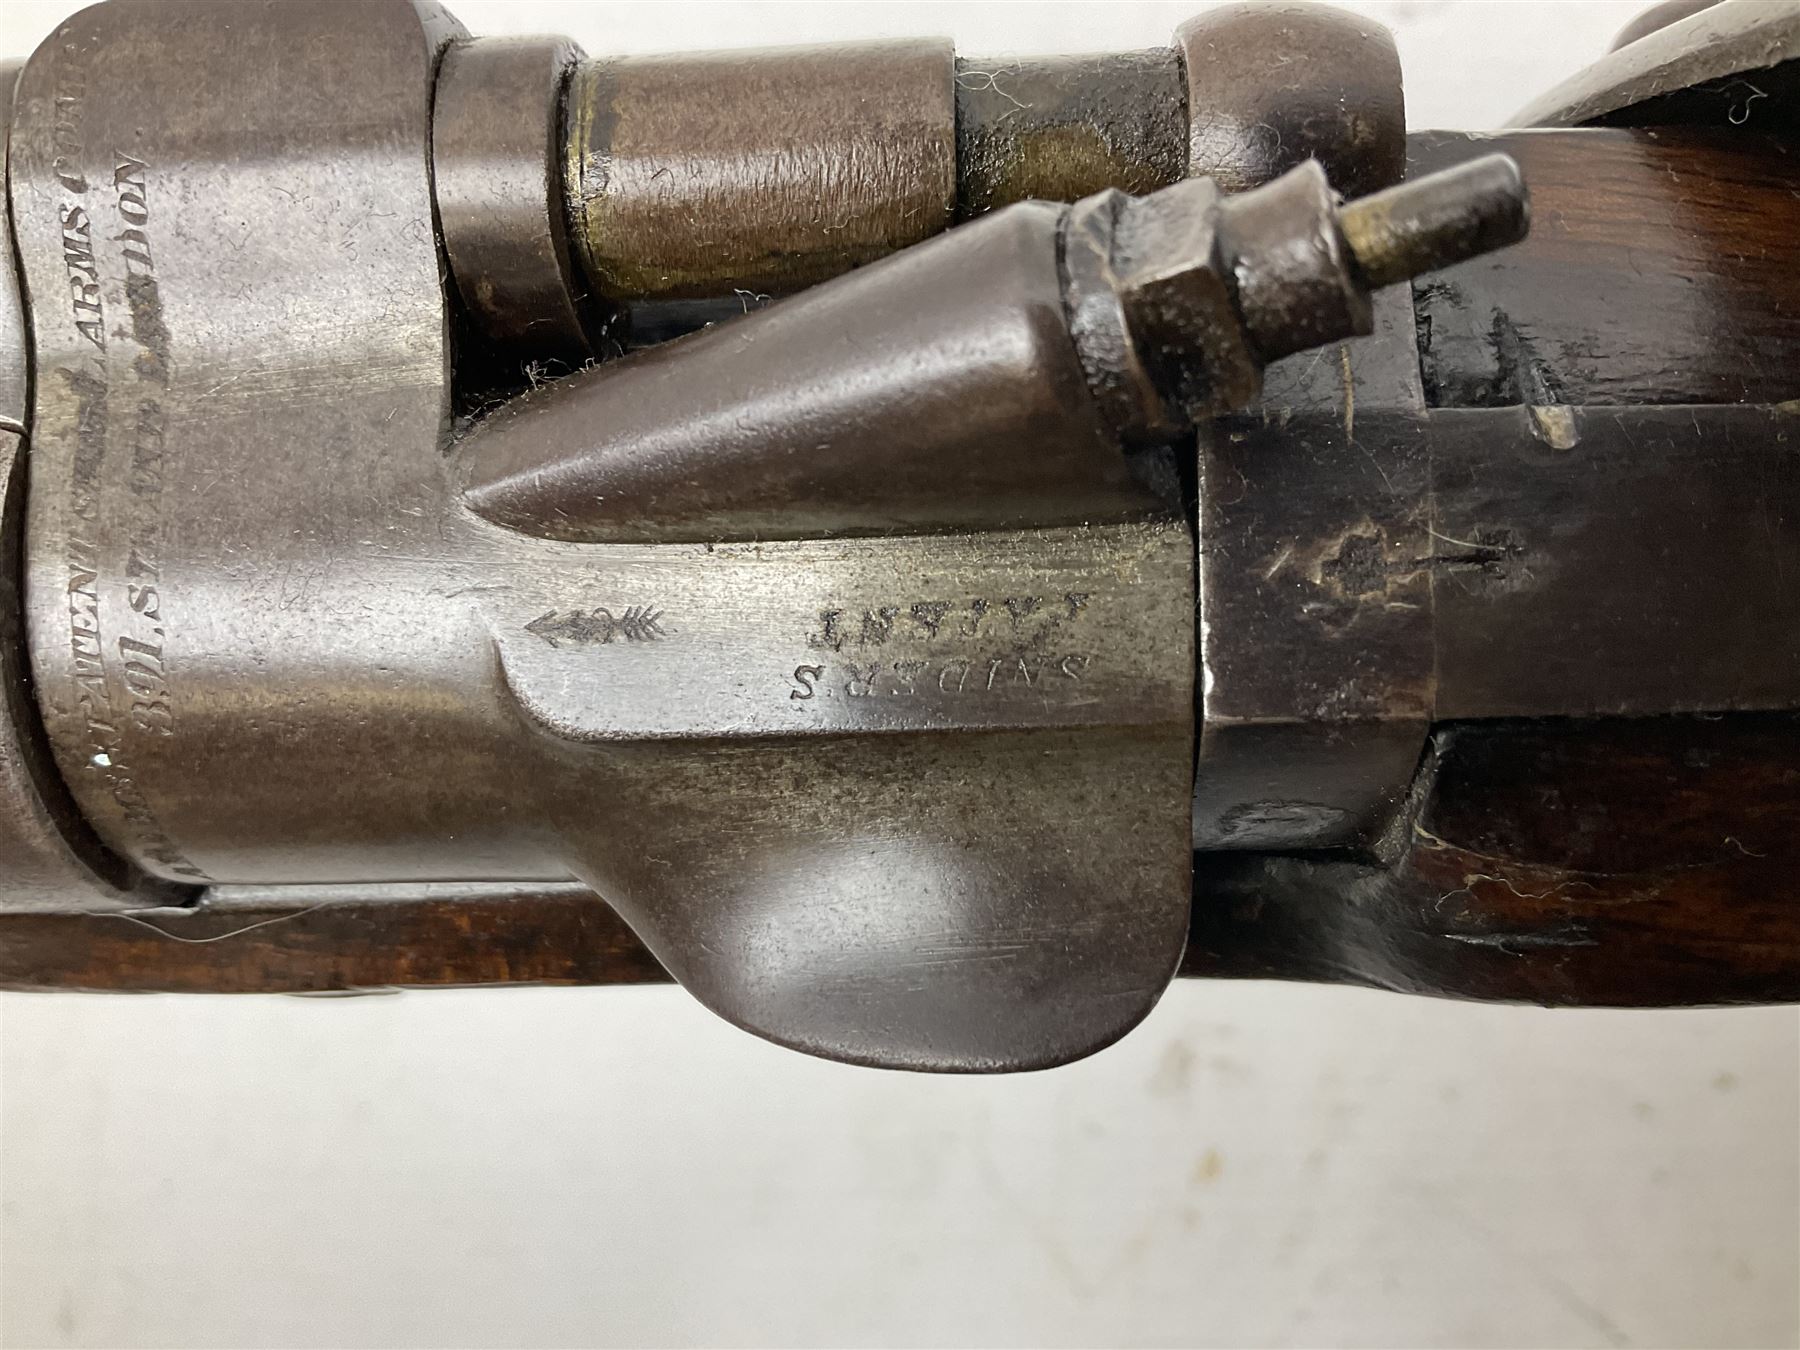 19th century Adams Patent Arms Company London (marked on top of action) .577 Snider action gun - Image 19 of 22